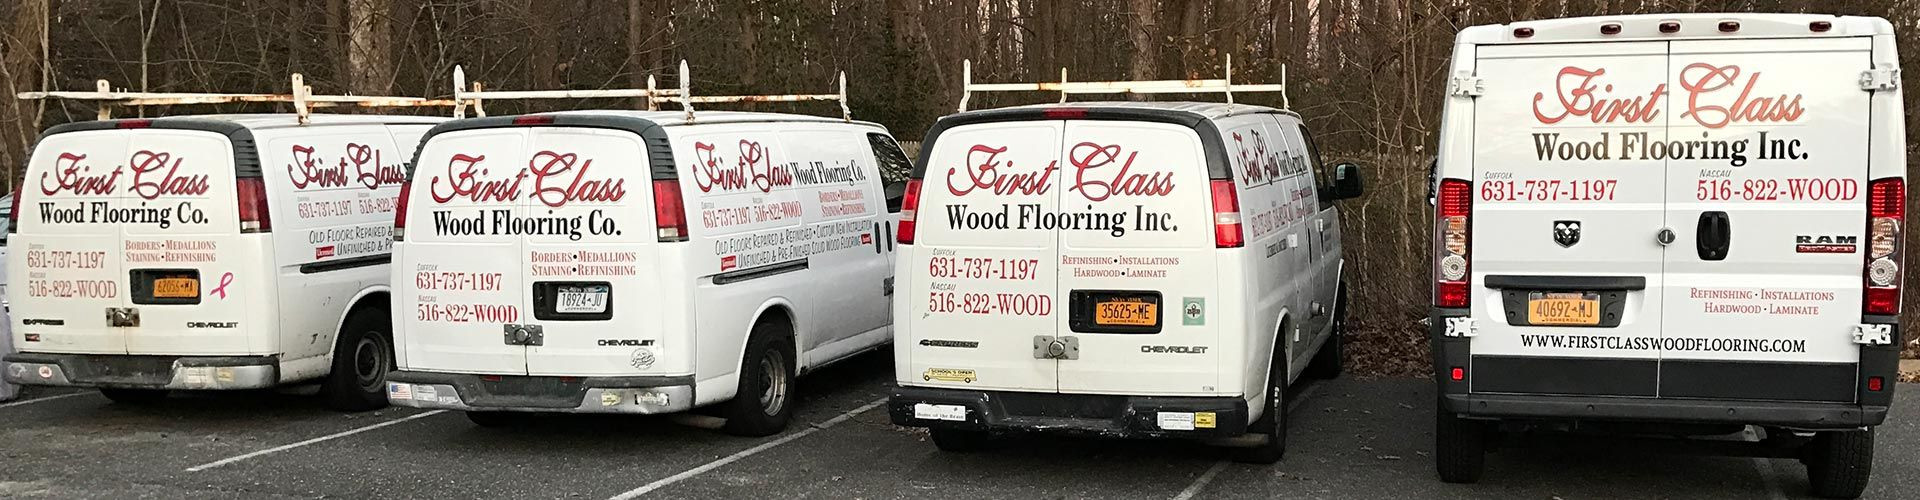 24 Fabulous Installing Engineered Hardwood Floors Yourself 2024 free download installing engineered hardwood floors yourself of first class wood flooring have years of experience in installing in first class wood flooring have years of experience in installing laminat